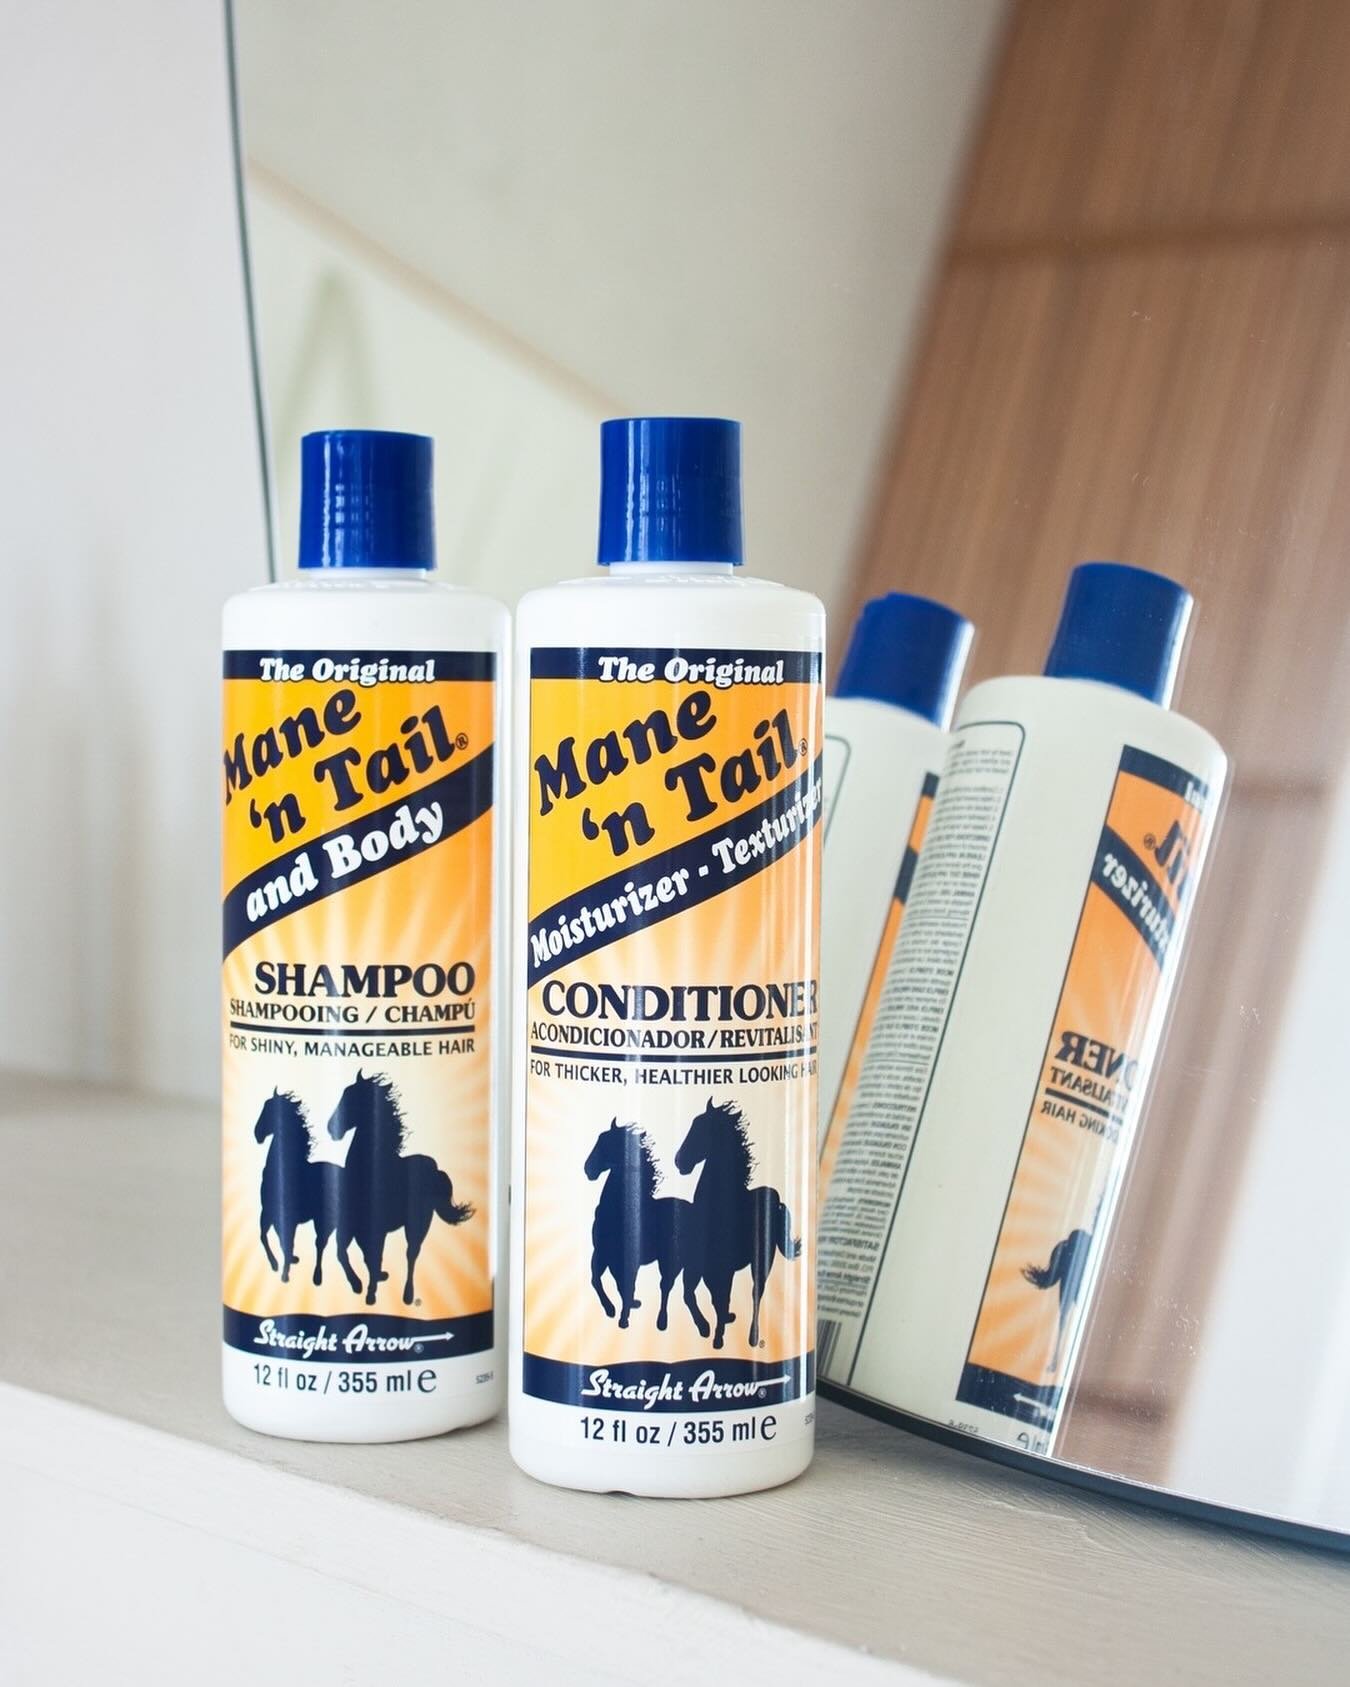 🌟 Discover the magic of Mane &lsquo;n Tail Original Shampoo &amp; Conditioner! 🌟

✨ Shampoo: Gently cleanses, and enhances shine.
💆&zwj;♀️ Conditioner: Hydrates, prevents hair breakage.

For beautiful hair, every day! #ManenTailMagic ✨🌿